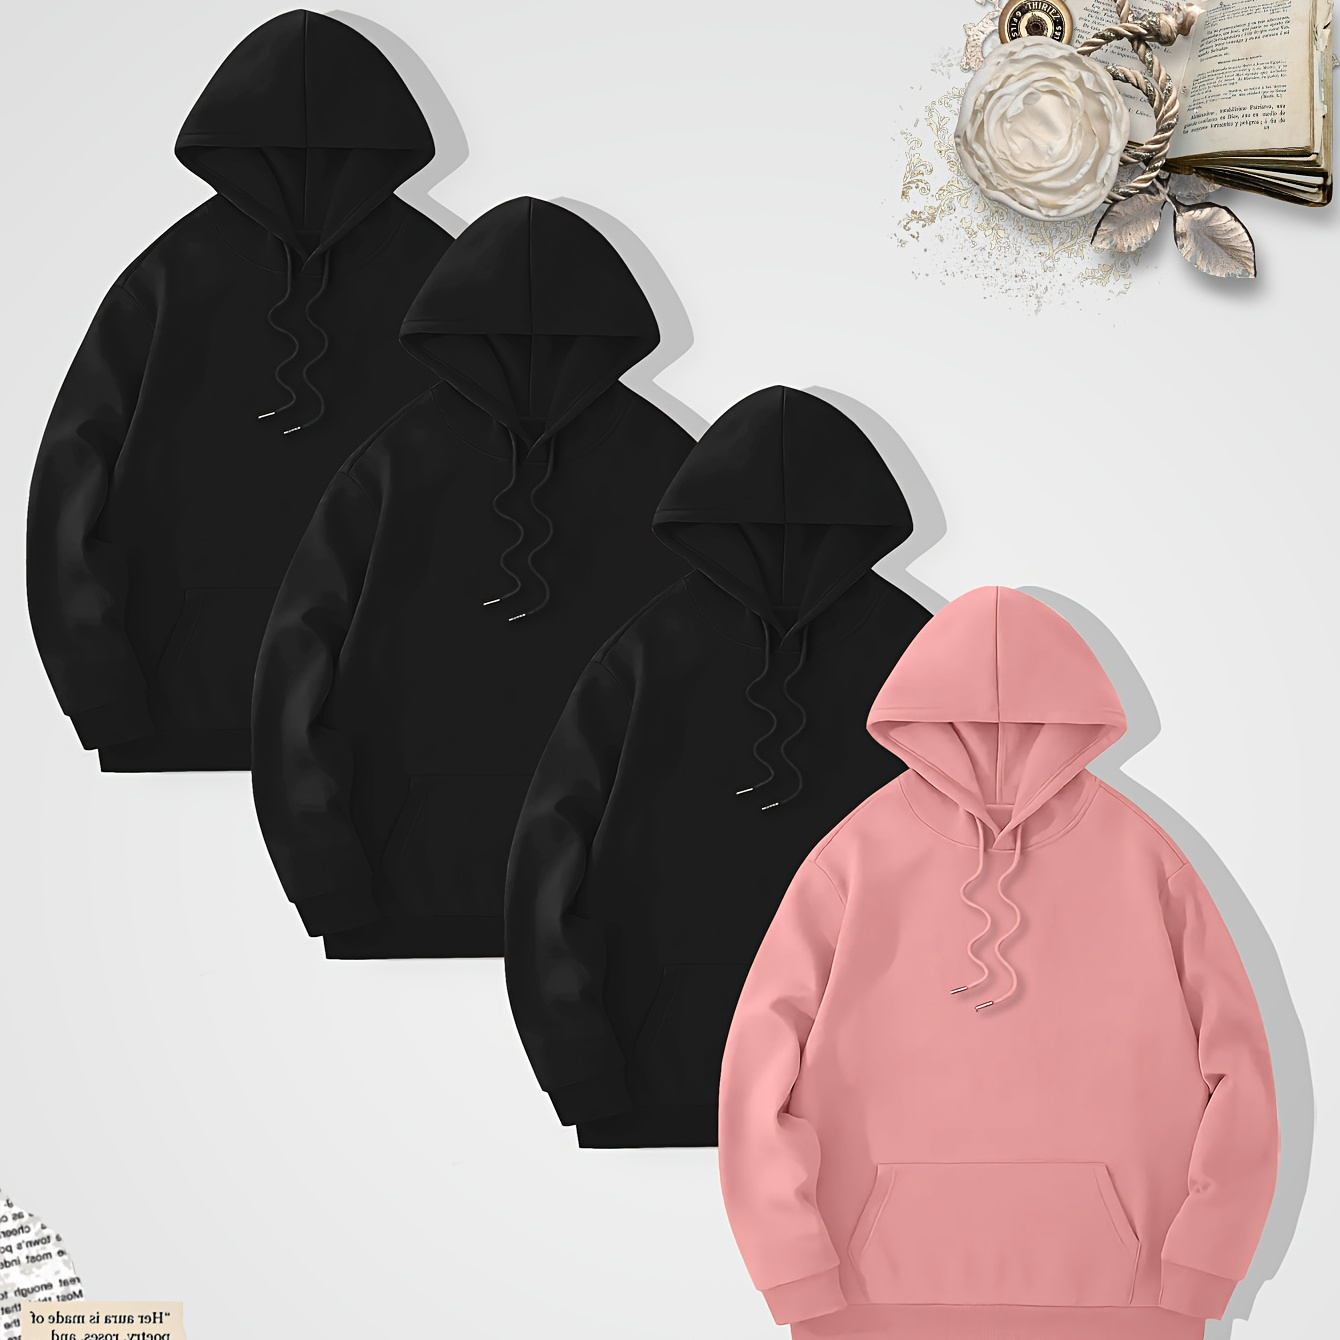 

4pcs Plus Fleece Men's Warm Solid Hooded Sweatshirt With Drawstring And Kangaroo Pocket, Men's Pullover Tops For Fall Winter